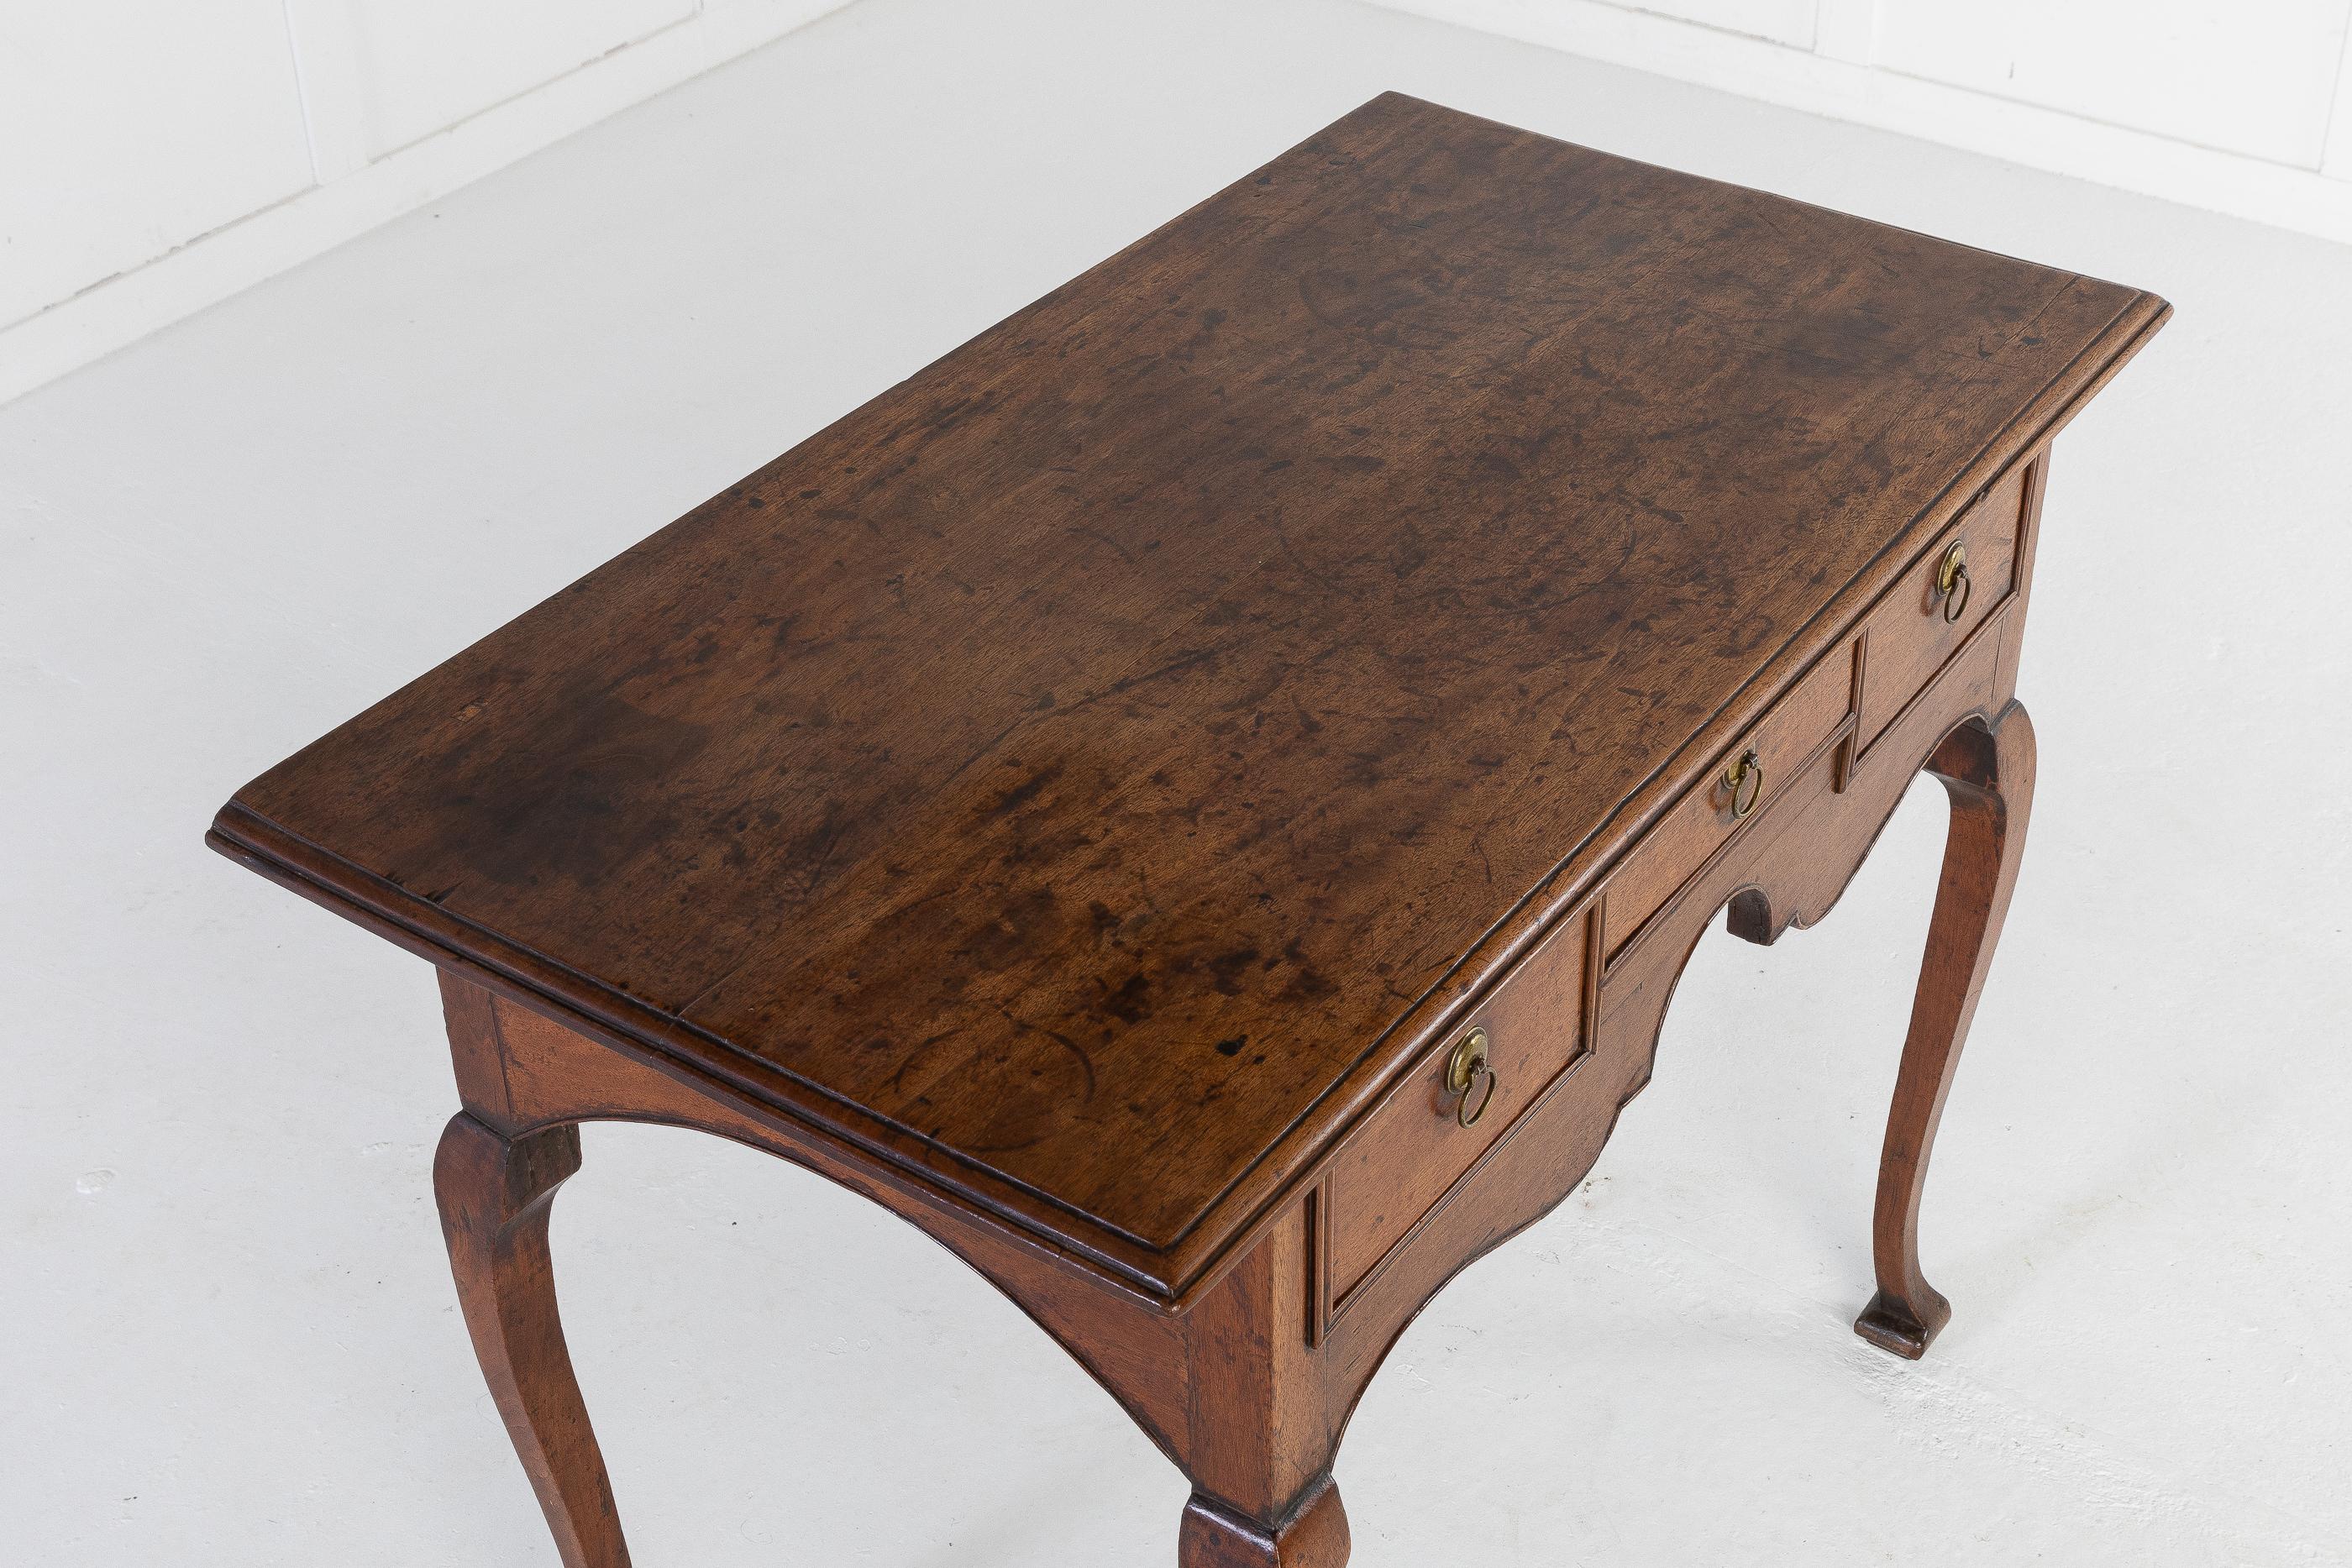 Elegant and fine model of an 18th Century, English walnut, country lowboy. With exaggerated moulded edge top, above three frieze drawers with small brass handles. Having a nicely shaped apron and raised on unusual, slender cabriole legs and small,